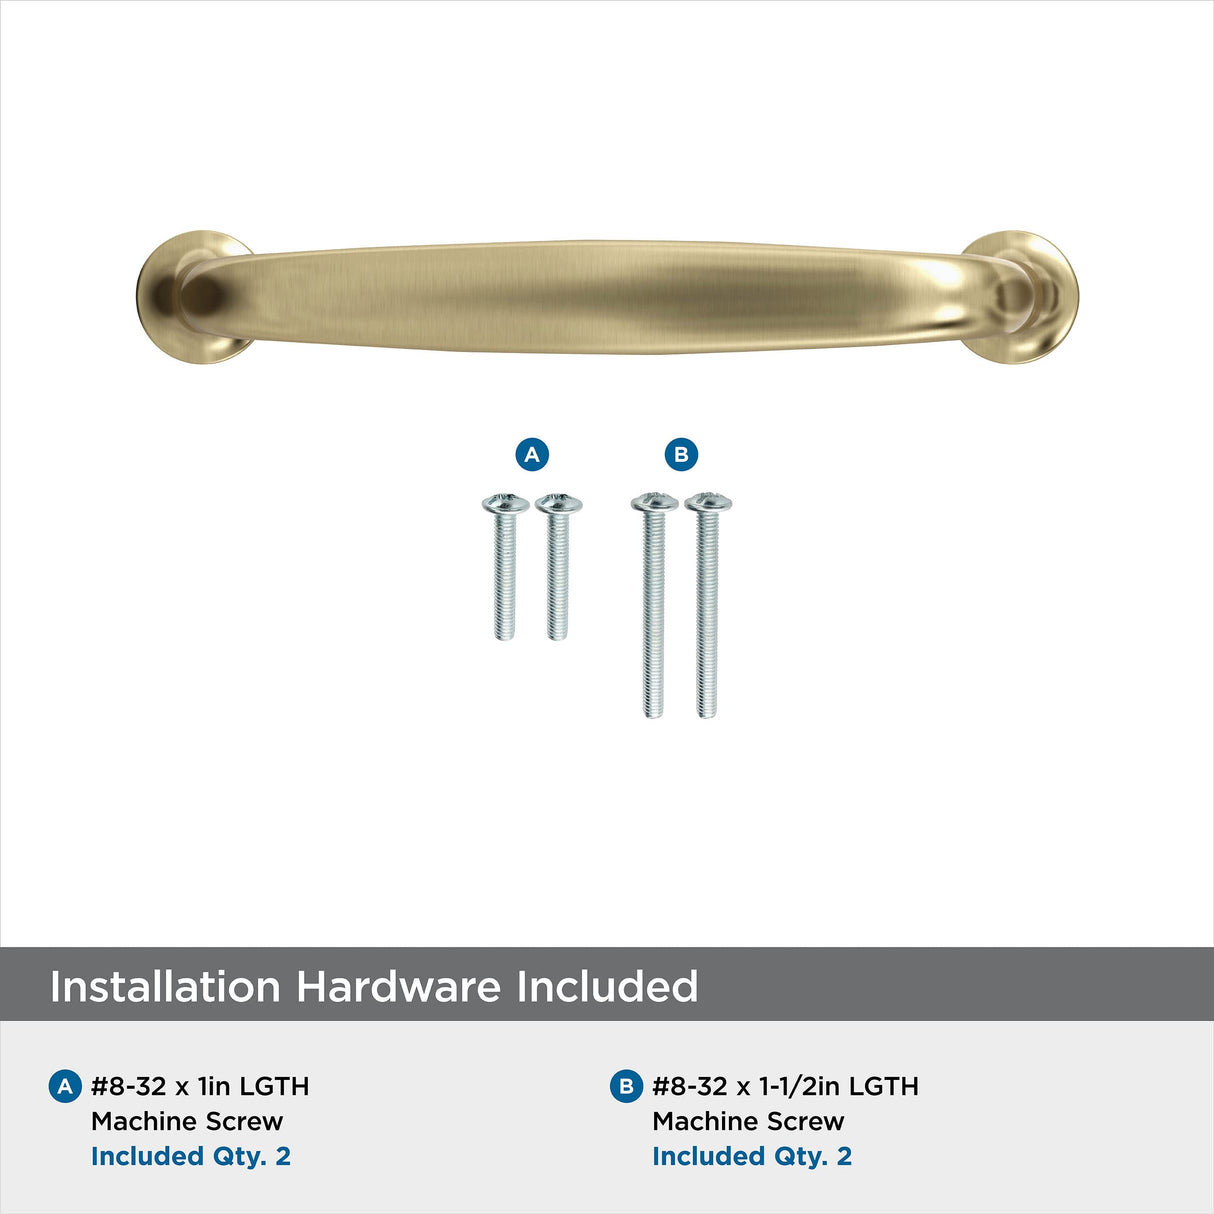 Amerock Cabinet Pull Golden Champagne 3-3/4 in (96 mm) Center-to-Center Drawer Pull Renown Kitchen and Bath Hardware Furniture Hardware